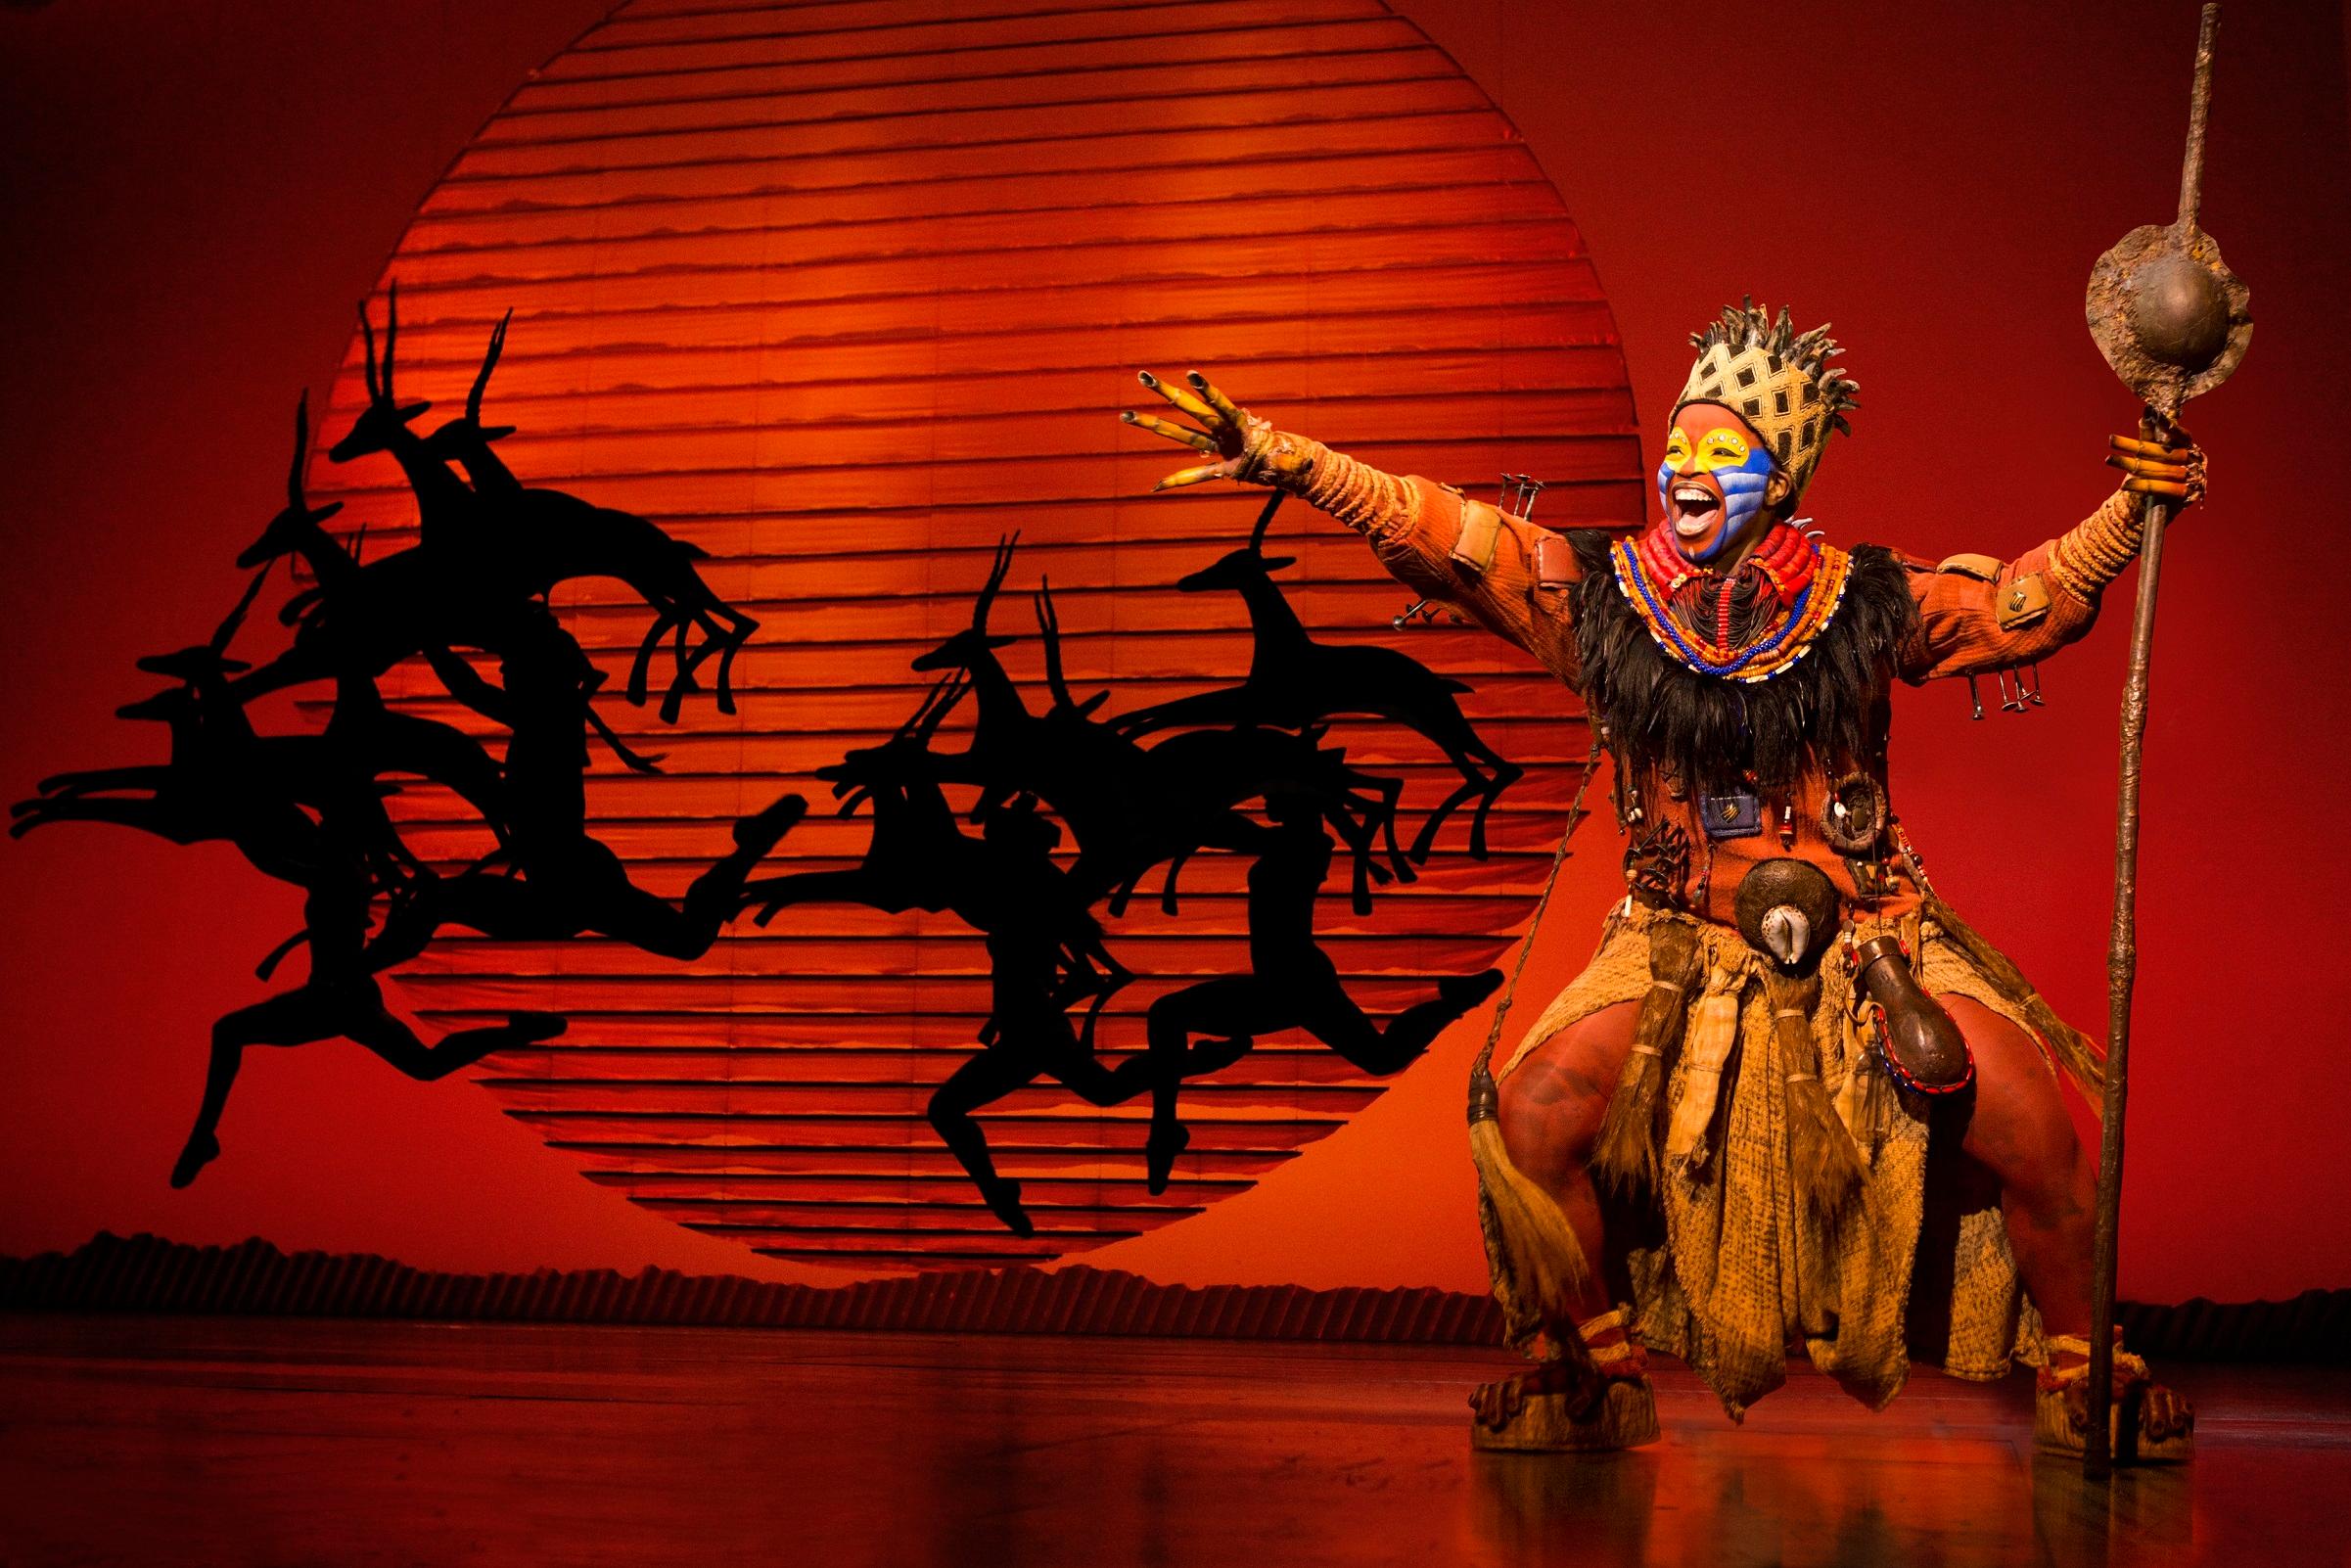 FIVE FAST FACTS YOU DIDN’T KNOW ABOUT THE LION KING: THE MUSICAL